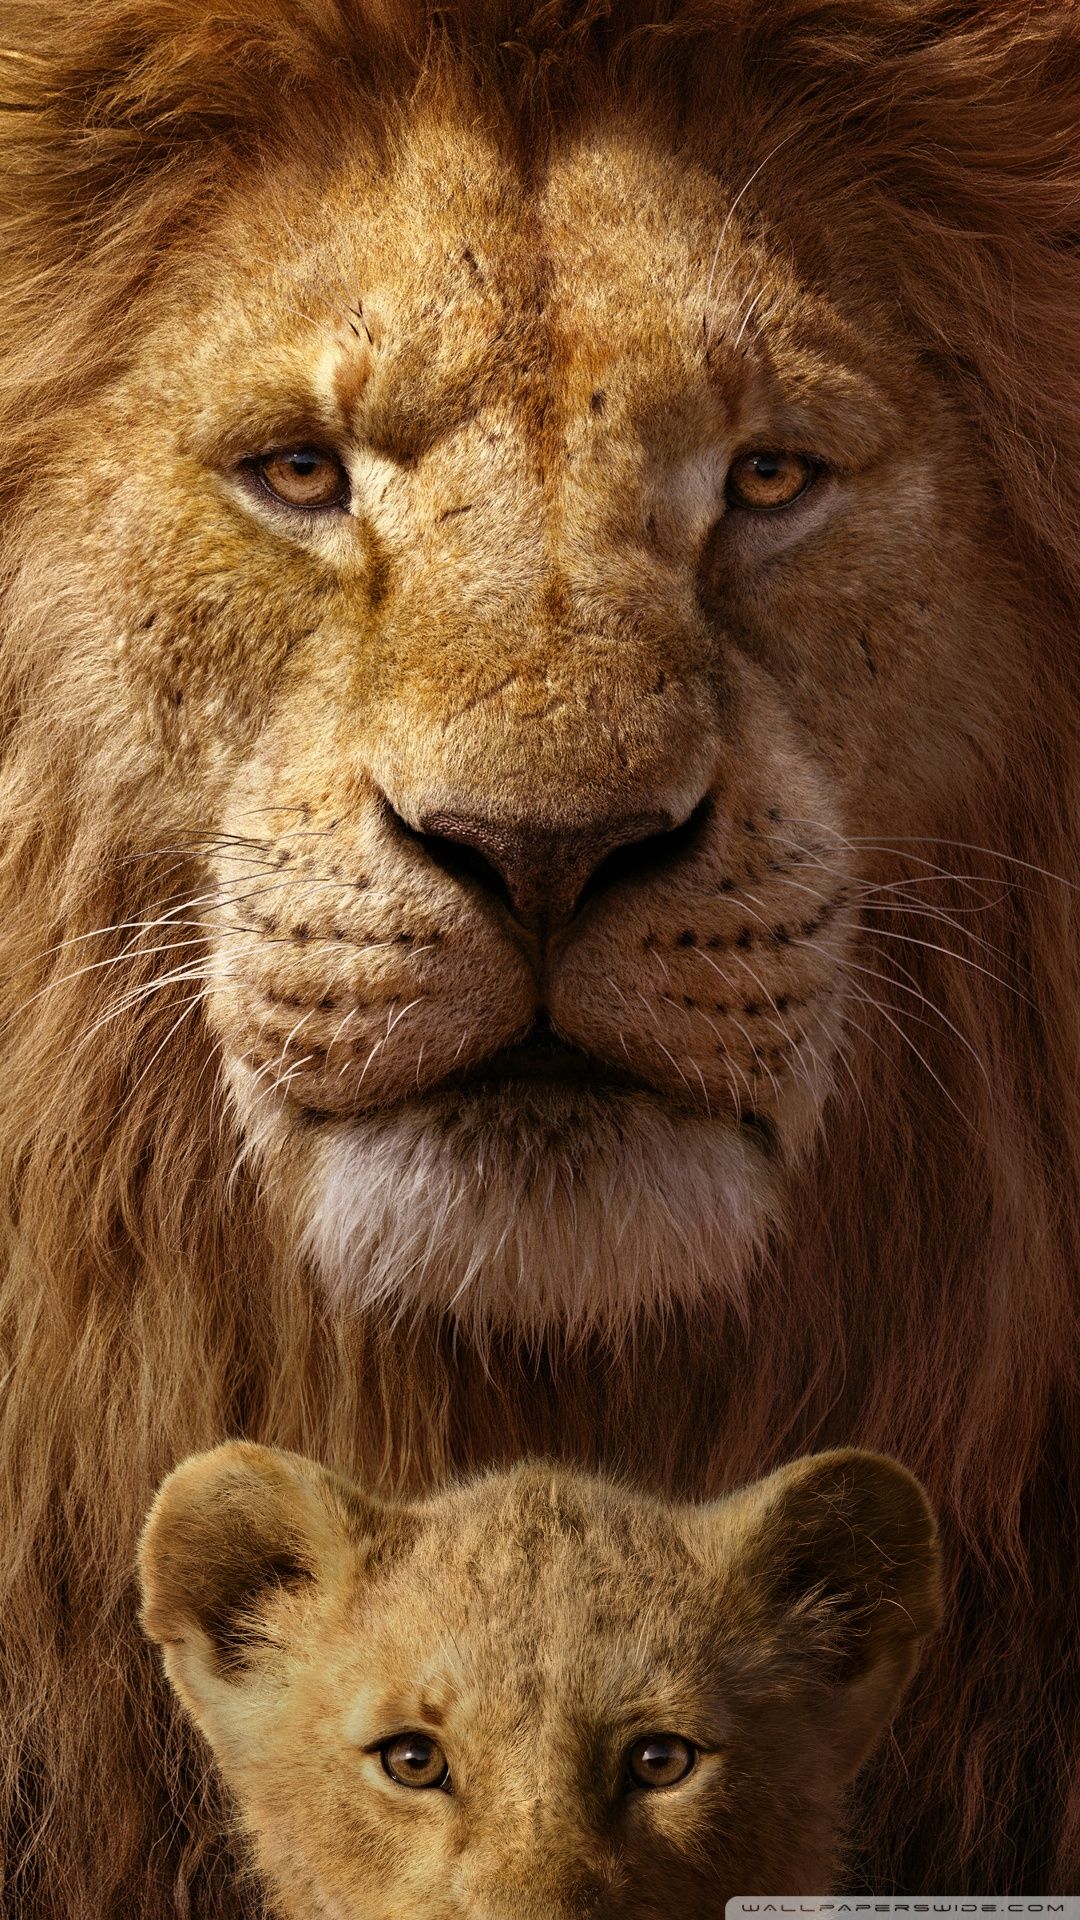 A lion and his cub are looking at the camera - The Lion King, lion